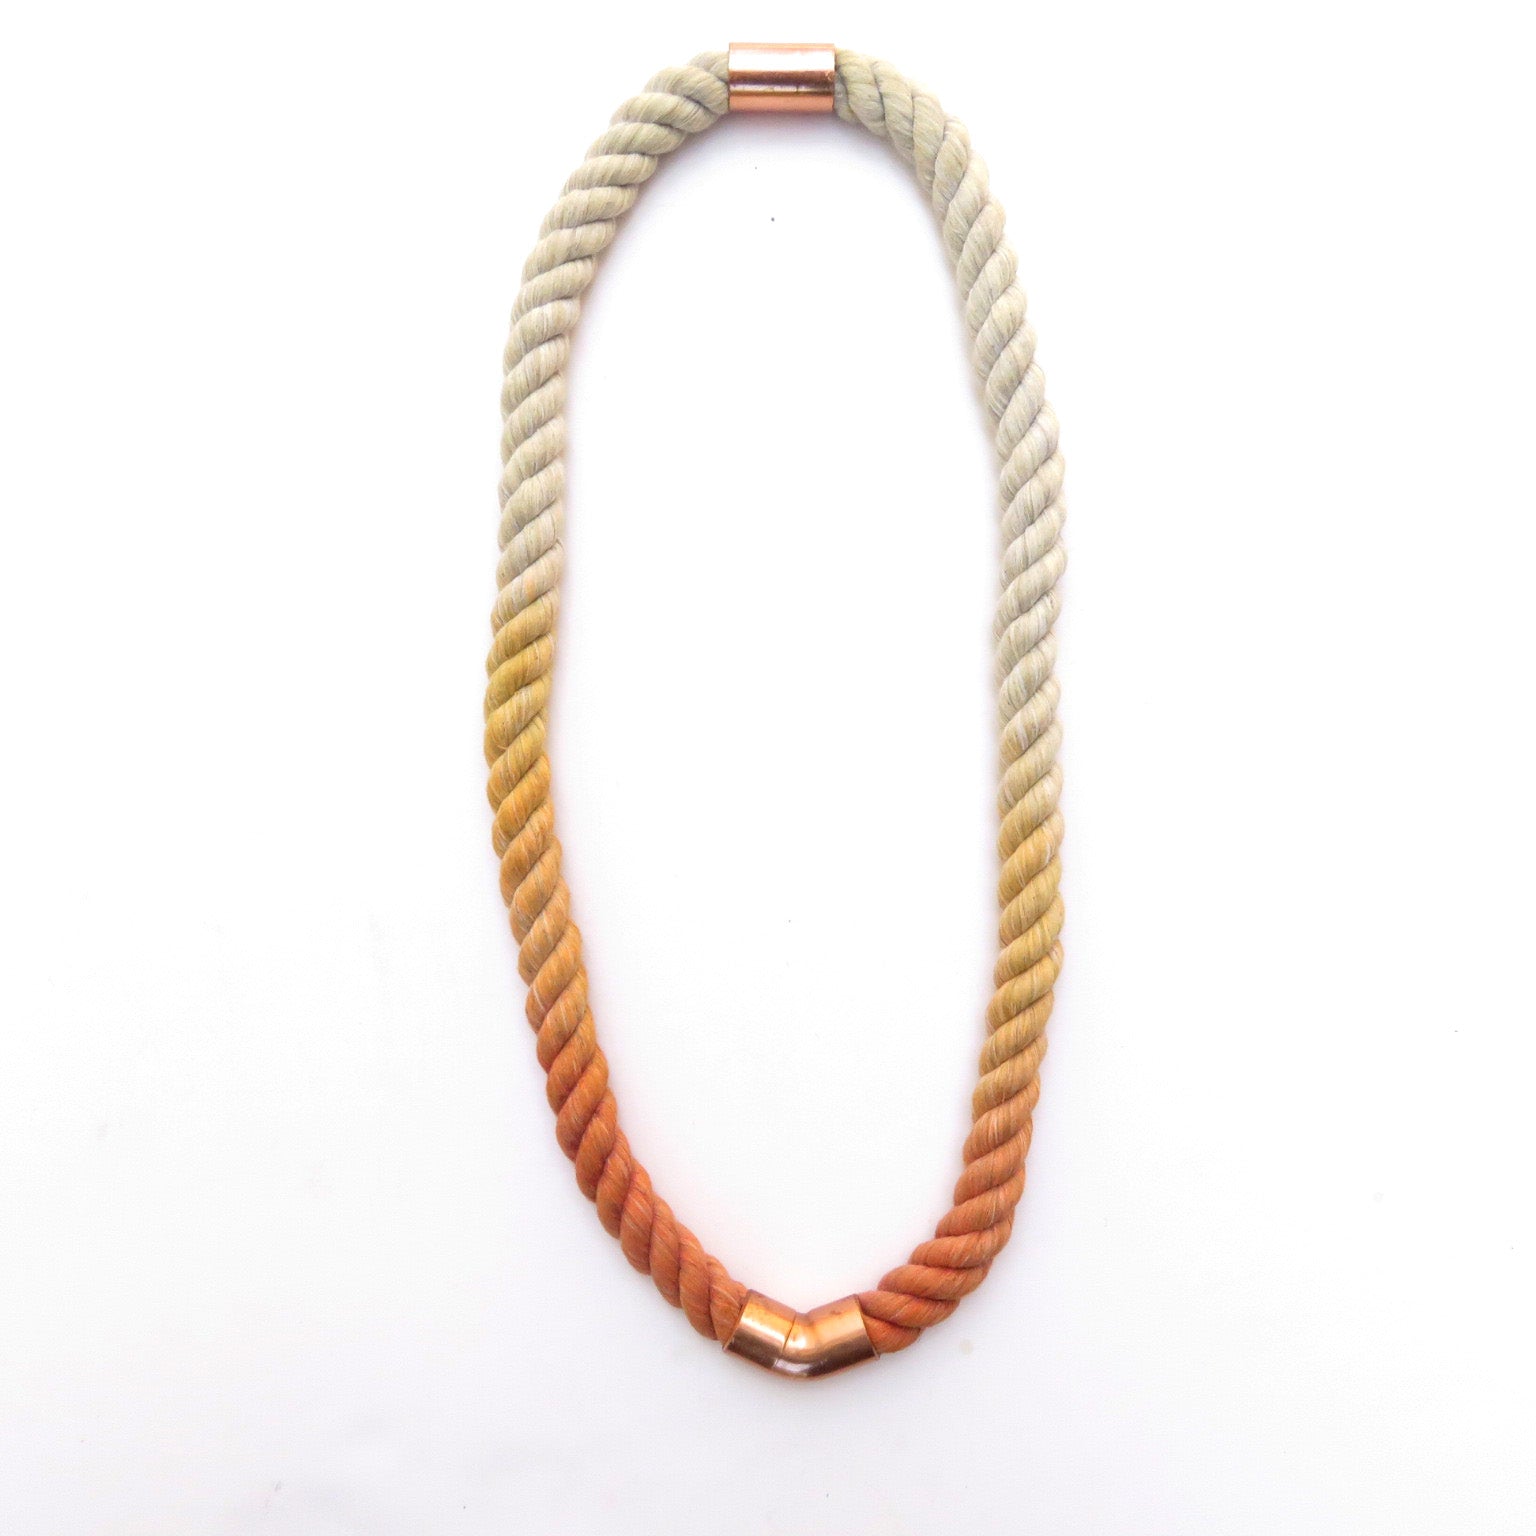 Sunkissed Sky Necklace - Long